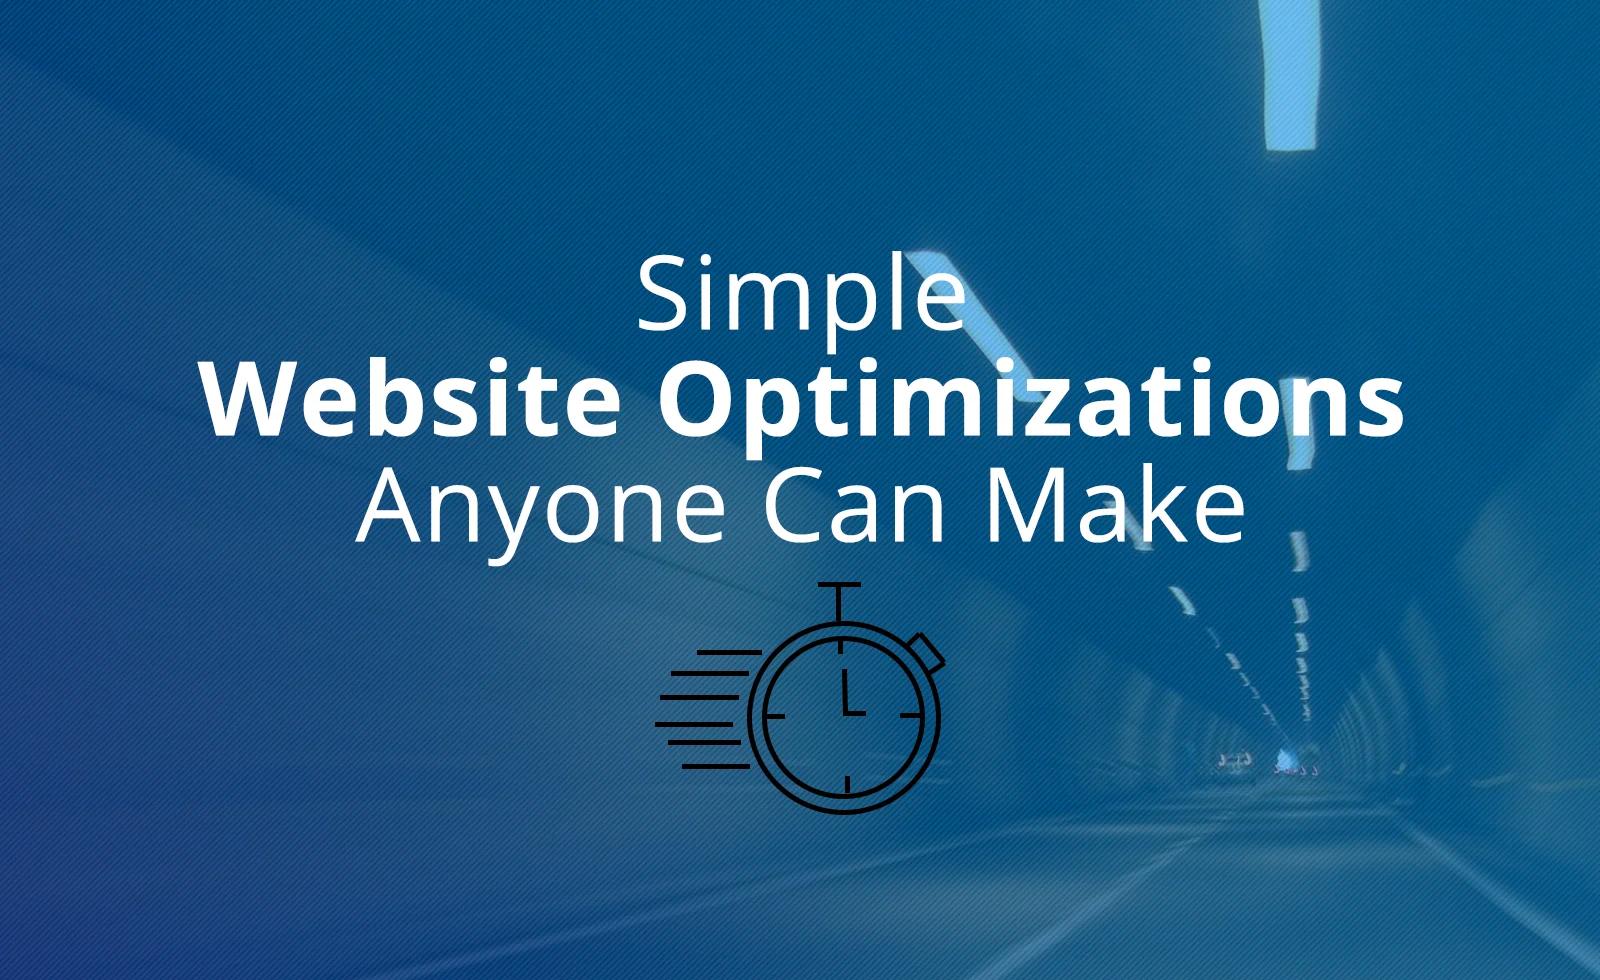 Simple Website Optimizations Anyone Can Make